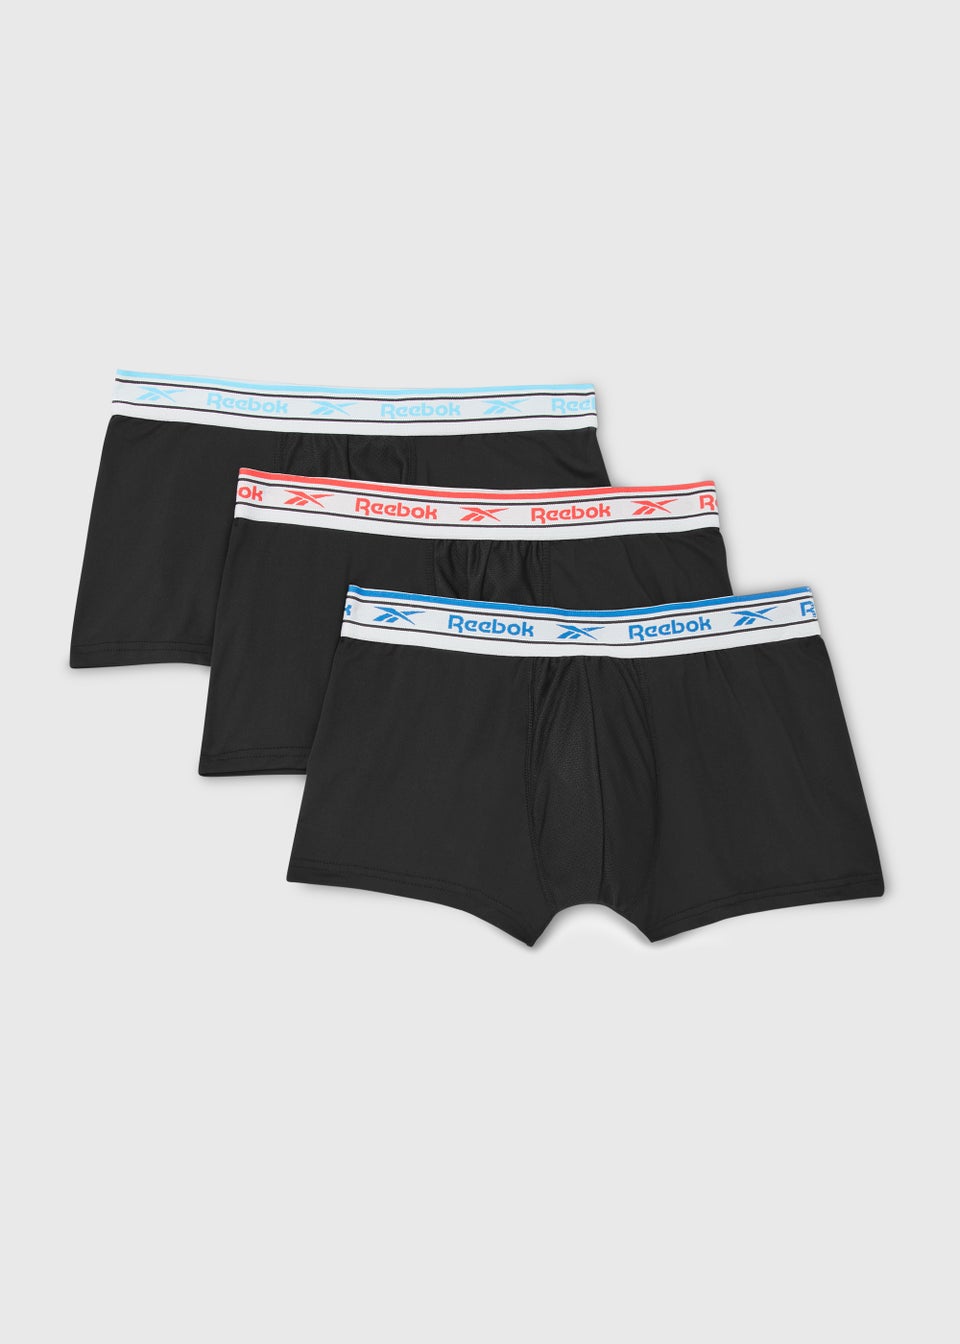 Branded Mens Underwear | French Connection Boxers - Matalan